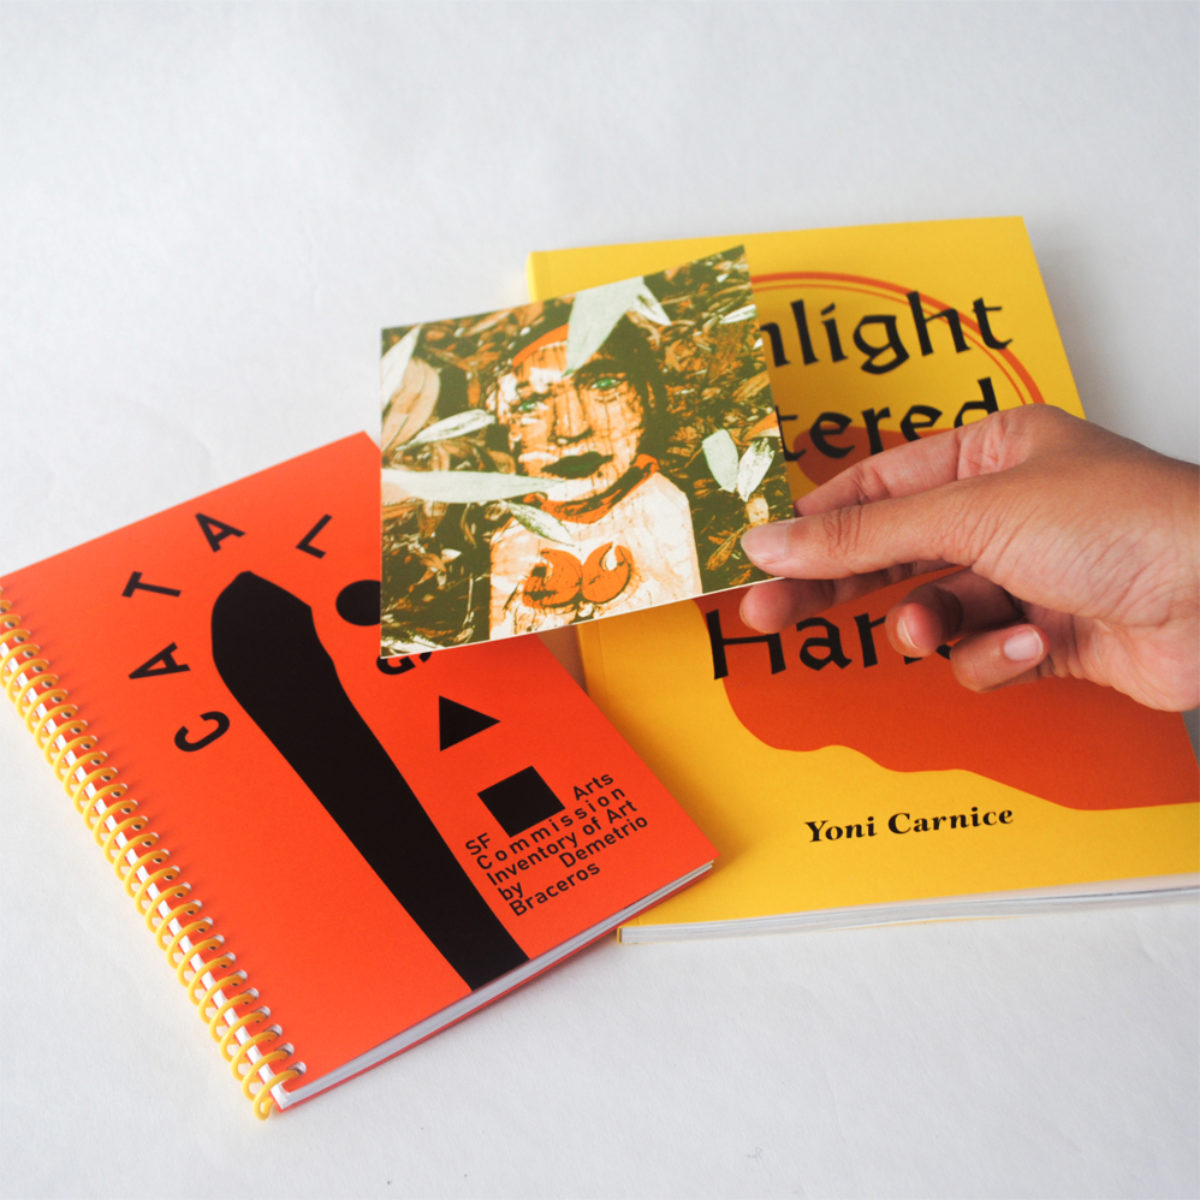 Yoni Carnice's book with a catalog and a hand holding a post card